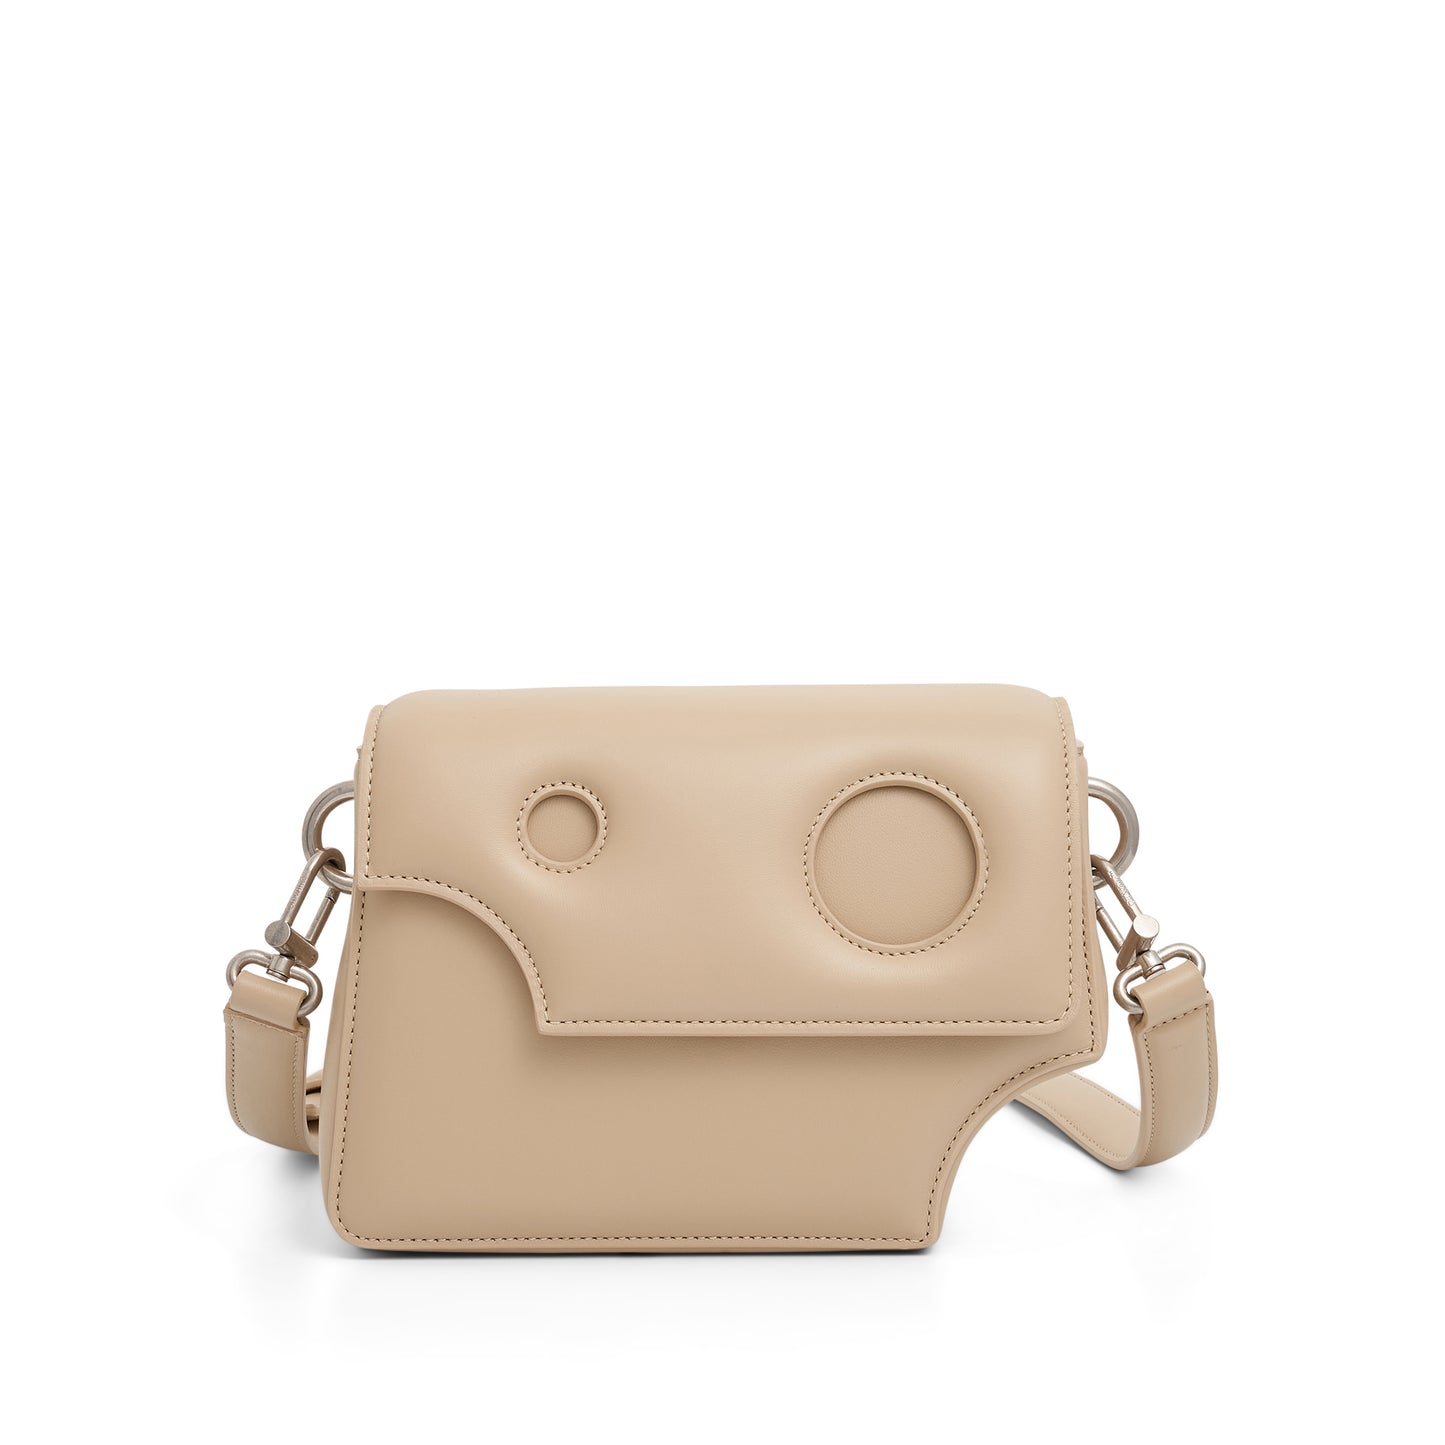 OFF-WHITE: Burrow 22 Off White bag in nappa leather with holes - Black